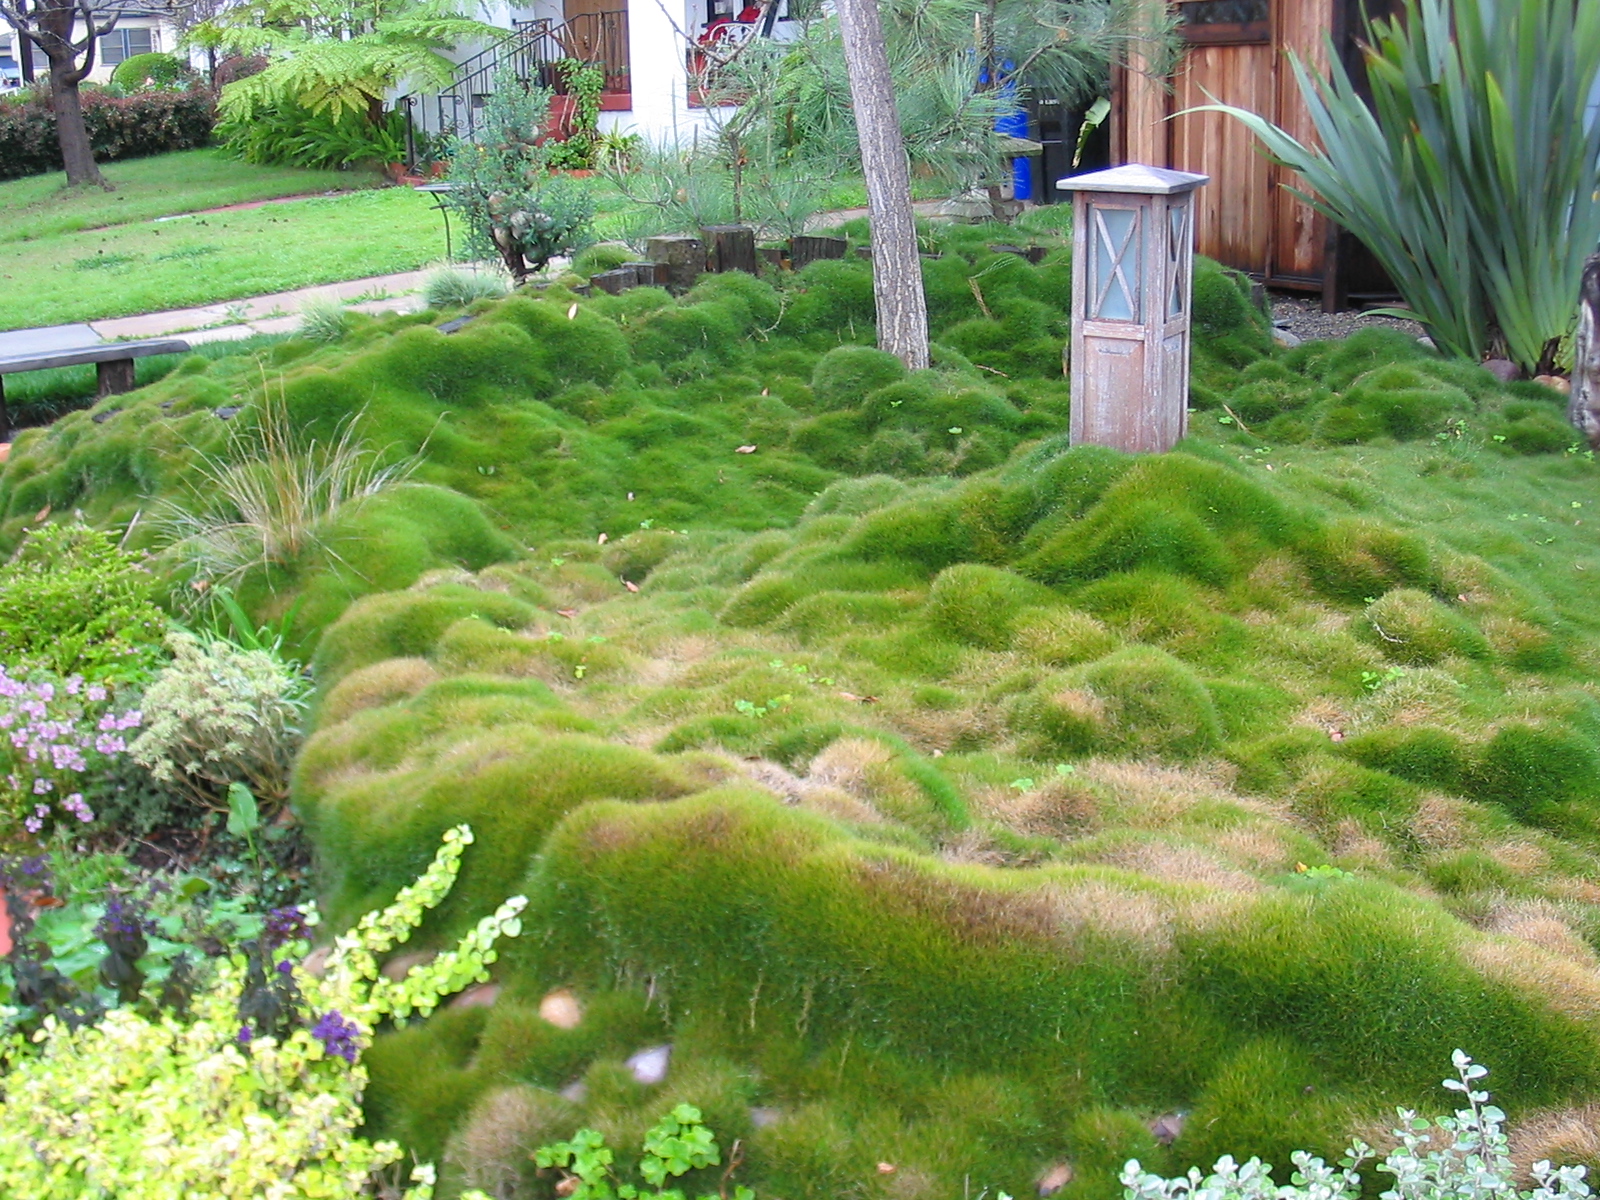 Photograph of Zoysia grass, a common ground cover grass. The image shows a lumpy carpet of fuzzy-looking green and brown grass with a small wooden decorative structure placed within it. Other plants and a sidewalk can be seen at the edges of the image.